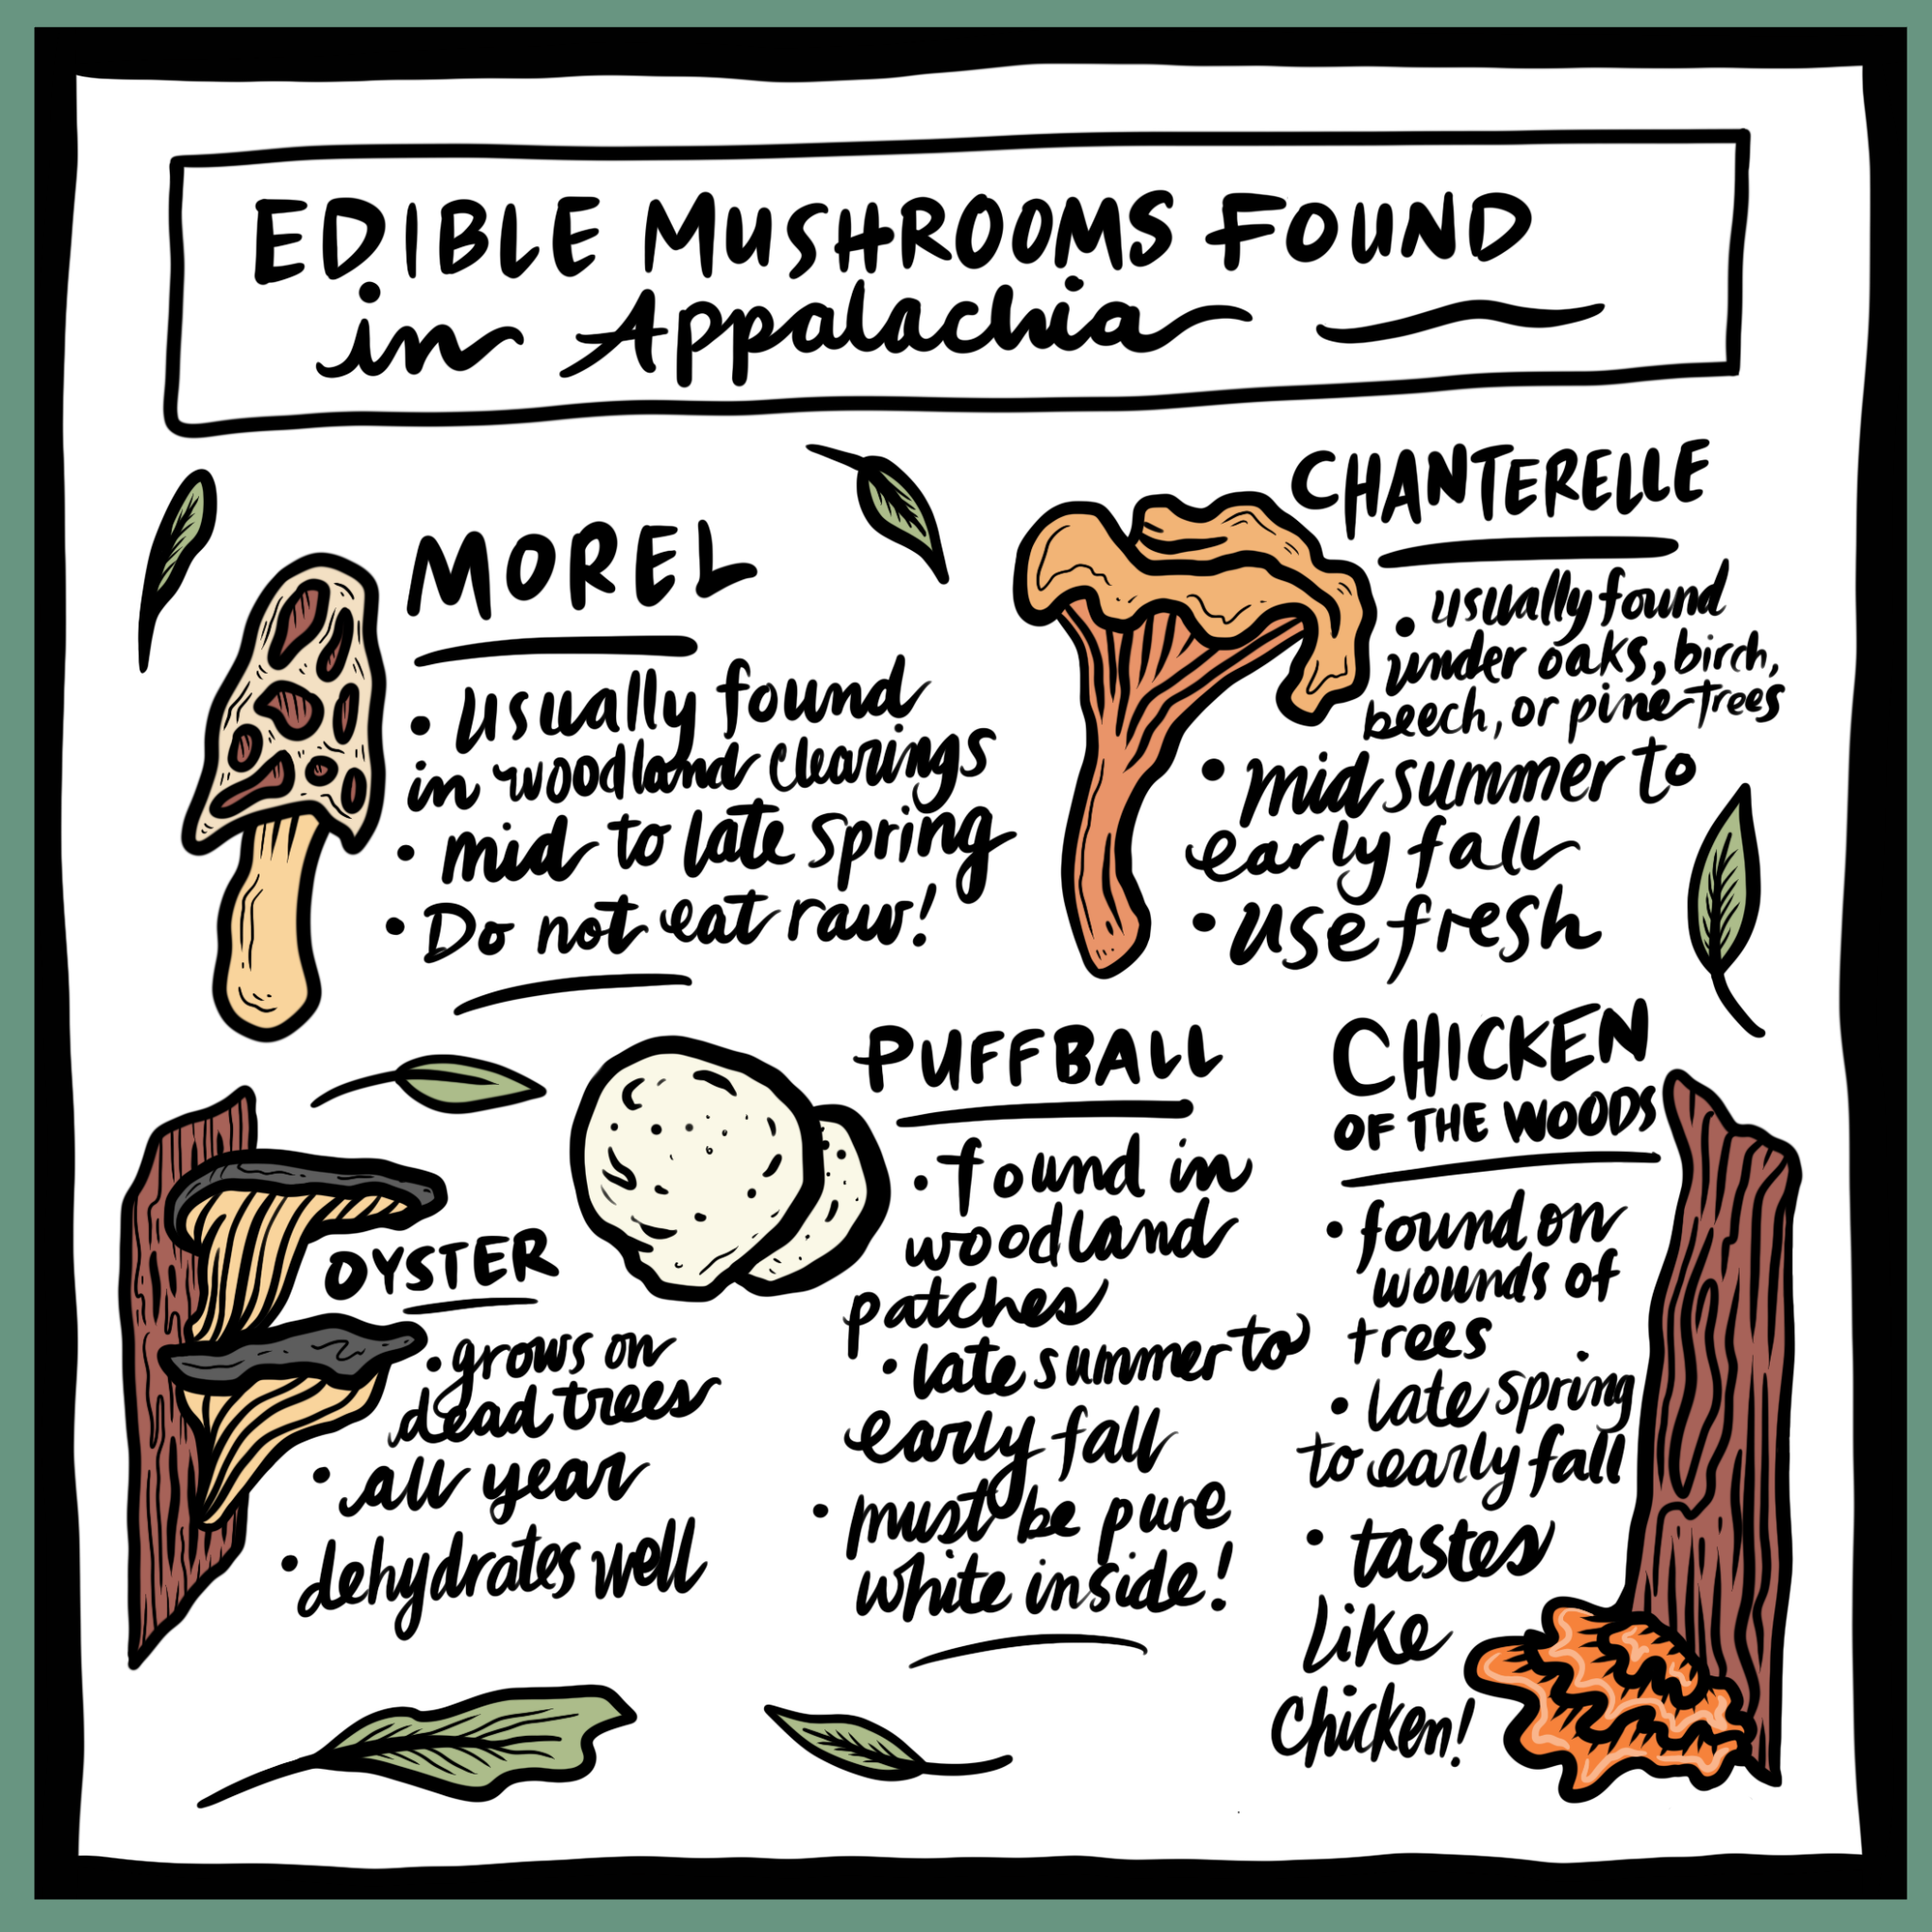 Edible mushrooms found in Appalachia. Morel, usually found in woodland clearings. Mid to late spring. Do not eat raw. Chanterelle. Usually found under oaks, birch, beech, or pine trees. Mid summer to early fall. Use fresh. Oyster. Grows on dead trees. All Year. Dehydrates well. Puffball. Found in woodland patches. Late summer to early fall. Must be pure white inside. Chicken of the woods. Found on wounds of trees. Late spring to early fall. Tastes like chicken!